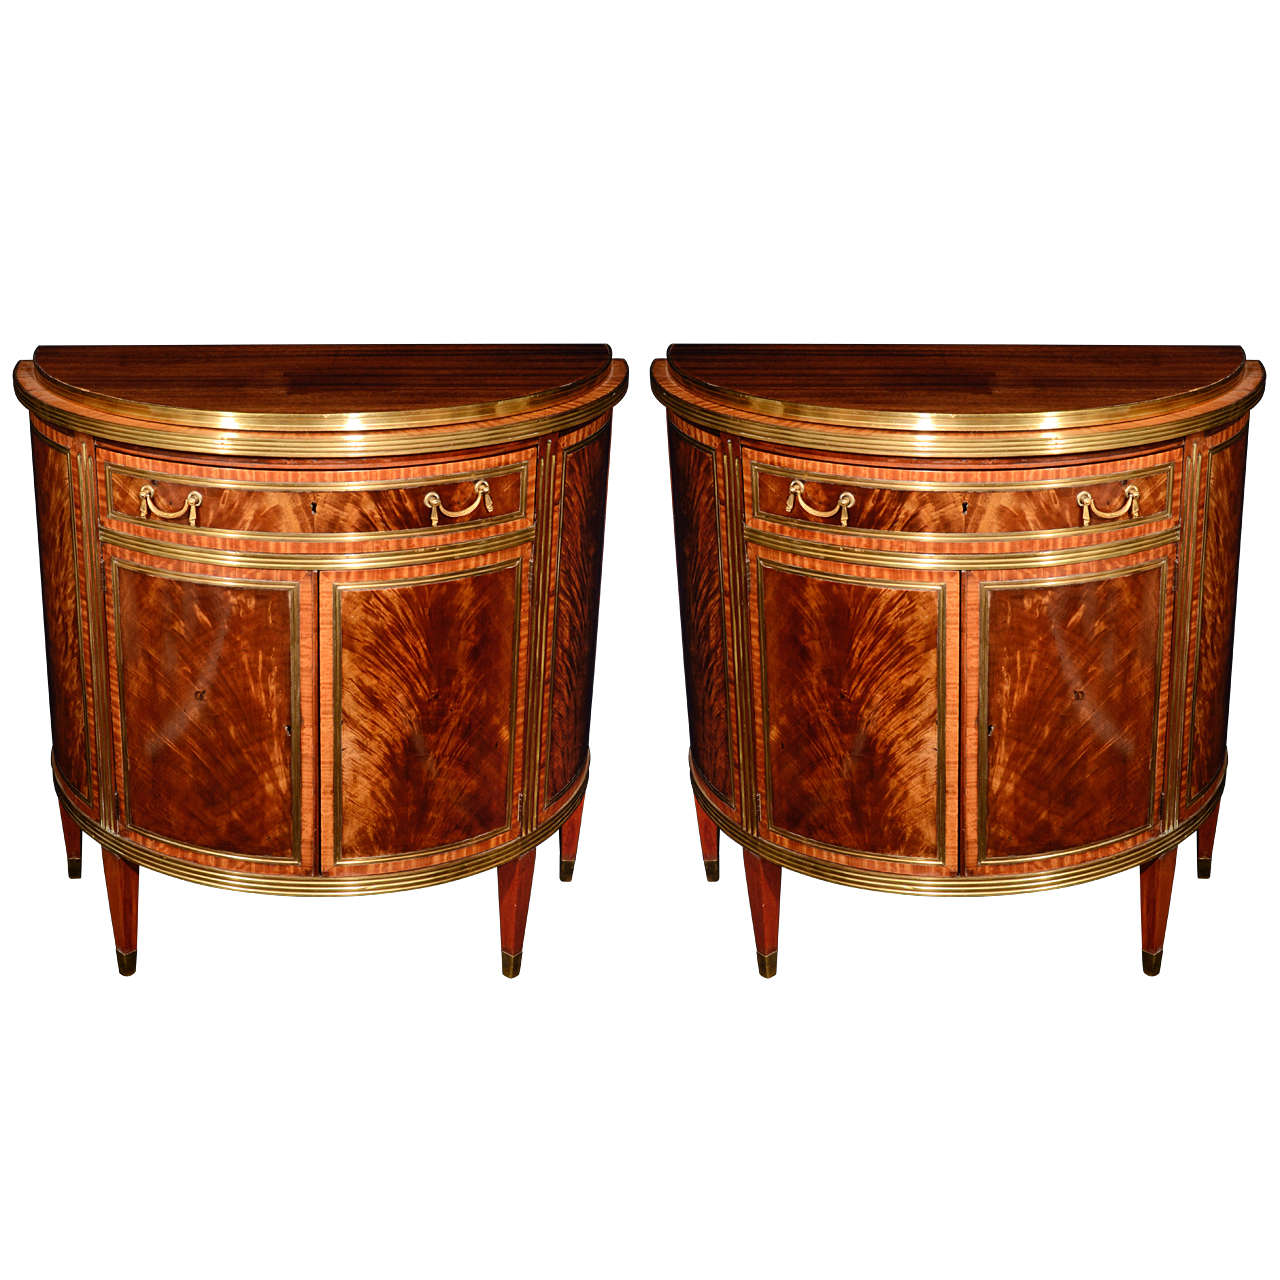 Pair of Neoclassical Antique Russian Gilt Bronze & Mahogany Commodes, ca.1820.